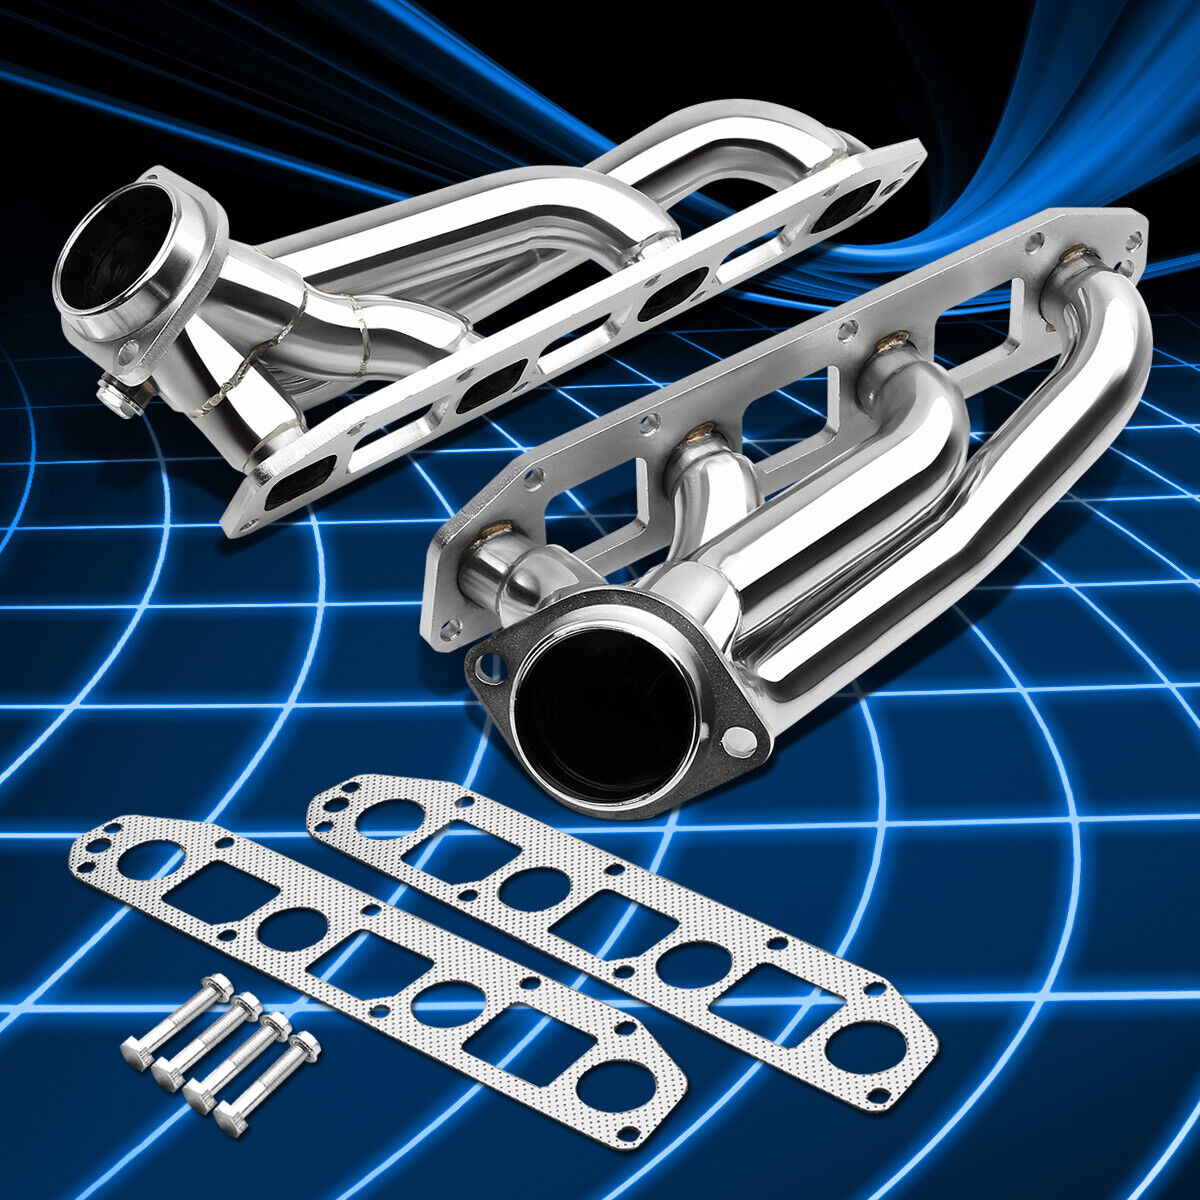 For 300/Magnum/Charger 5.7 HEMI Stainless Performance  Header Manifold Exhaust